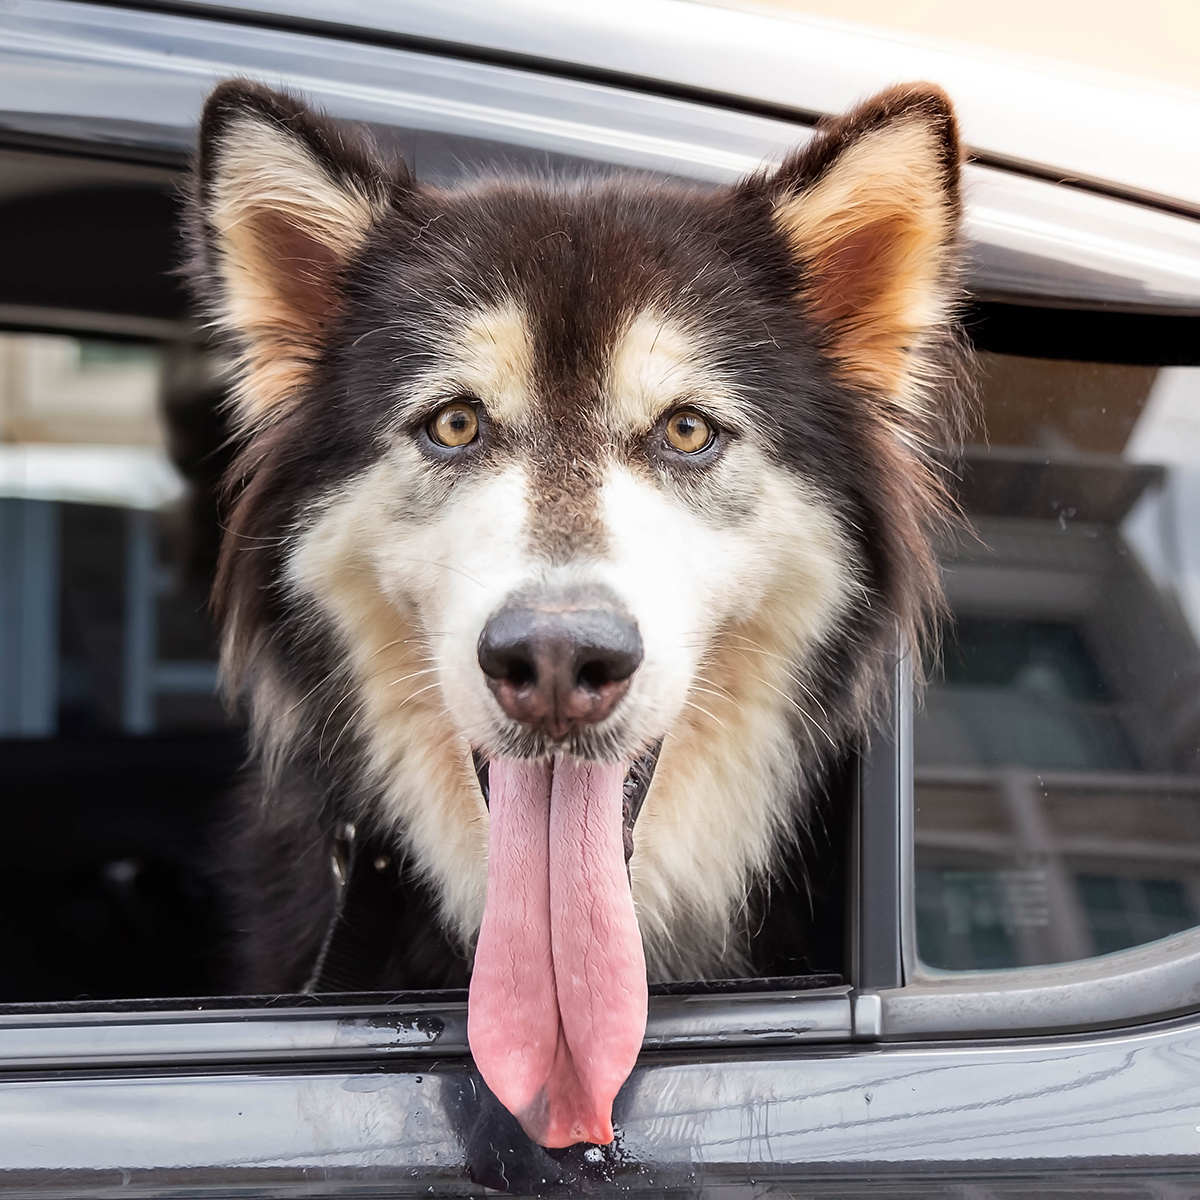 How to Protect Your Dog from Heatstroke